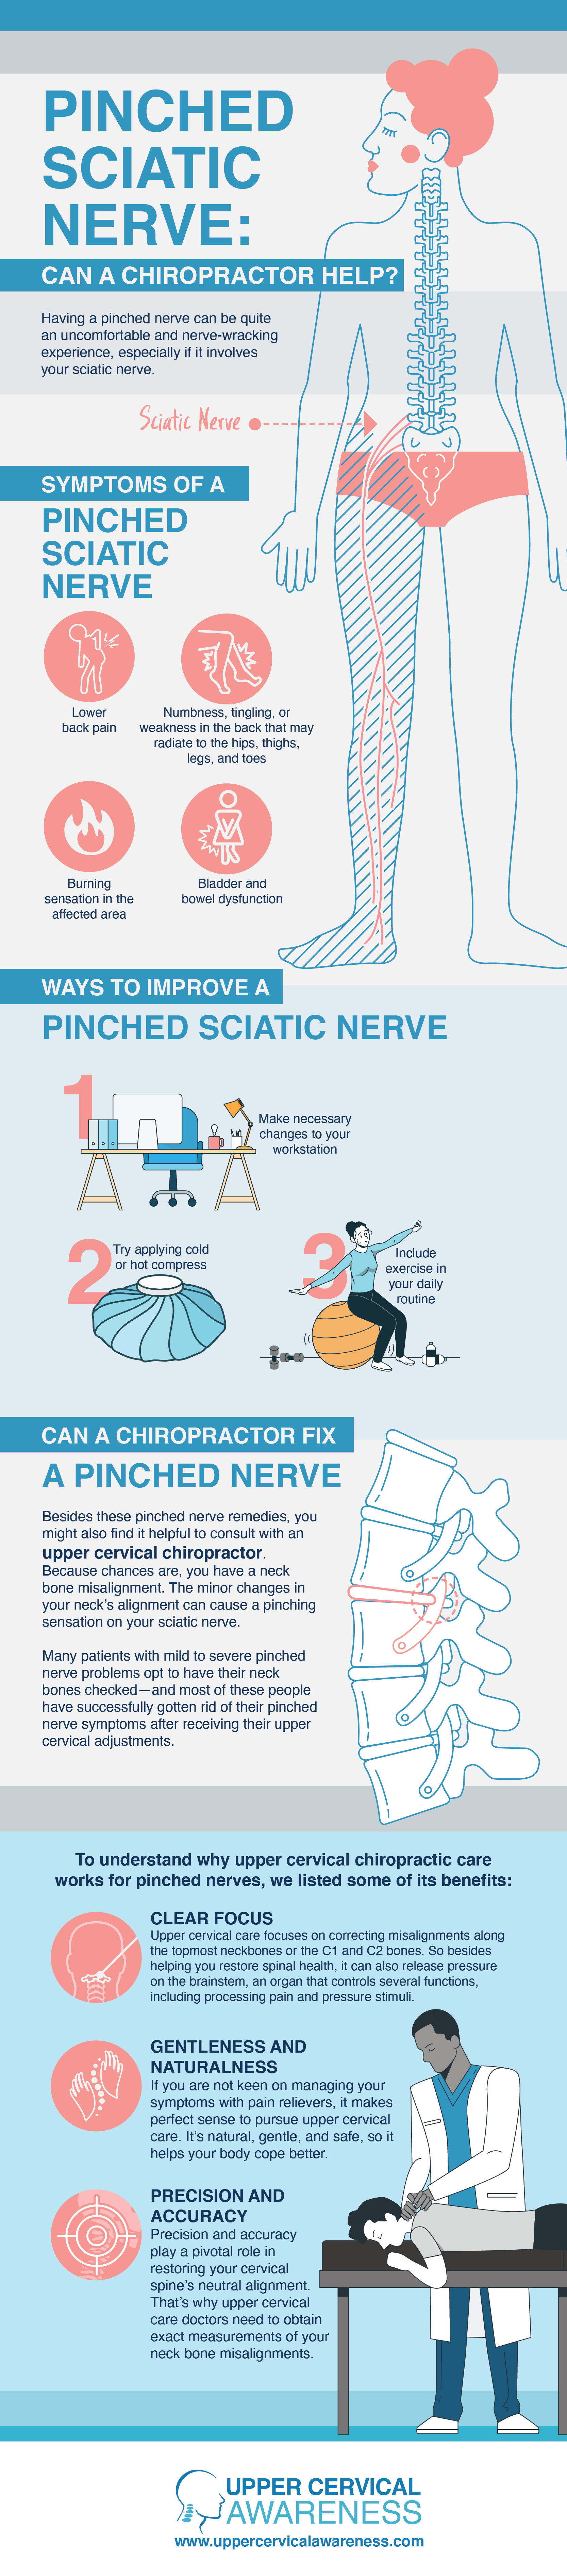 Pinched Sciatic Nerve: Can a Chiropractor Help?